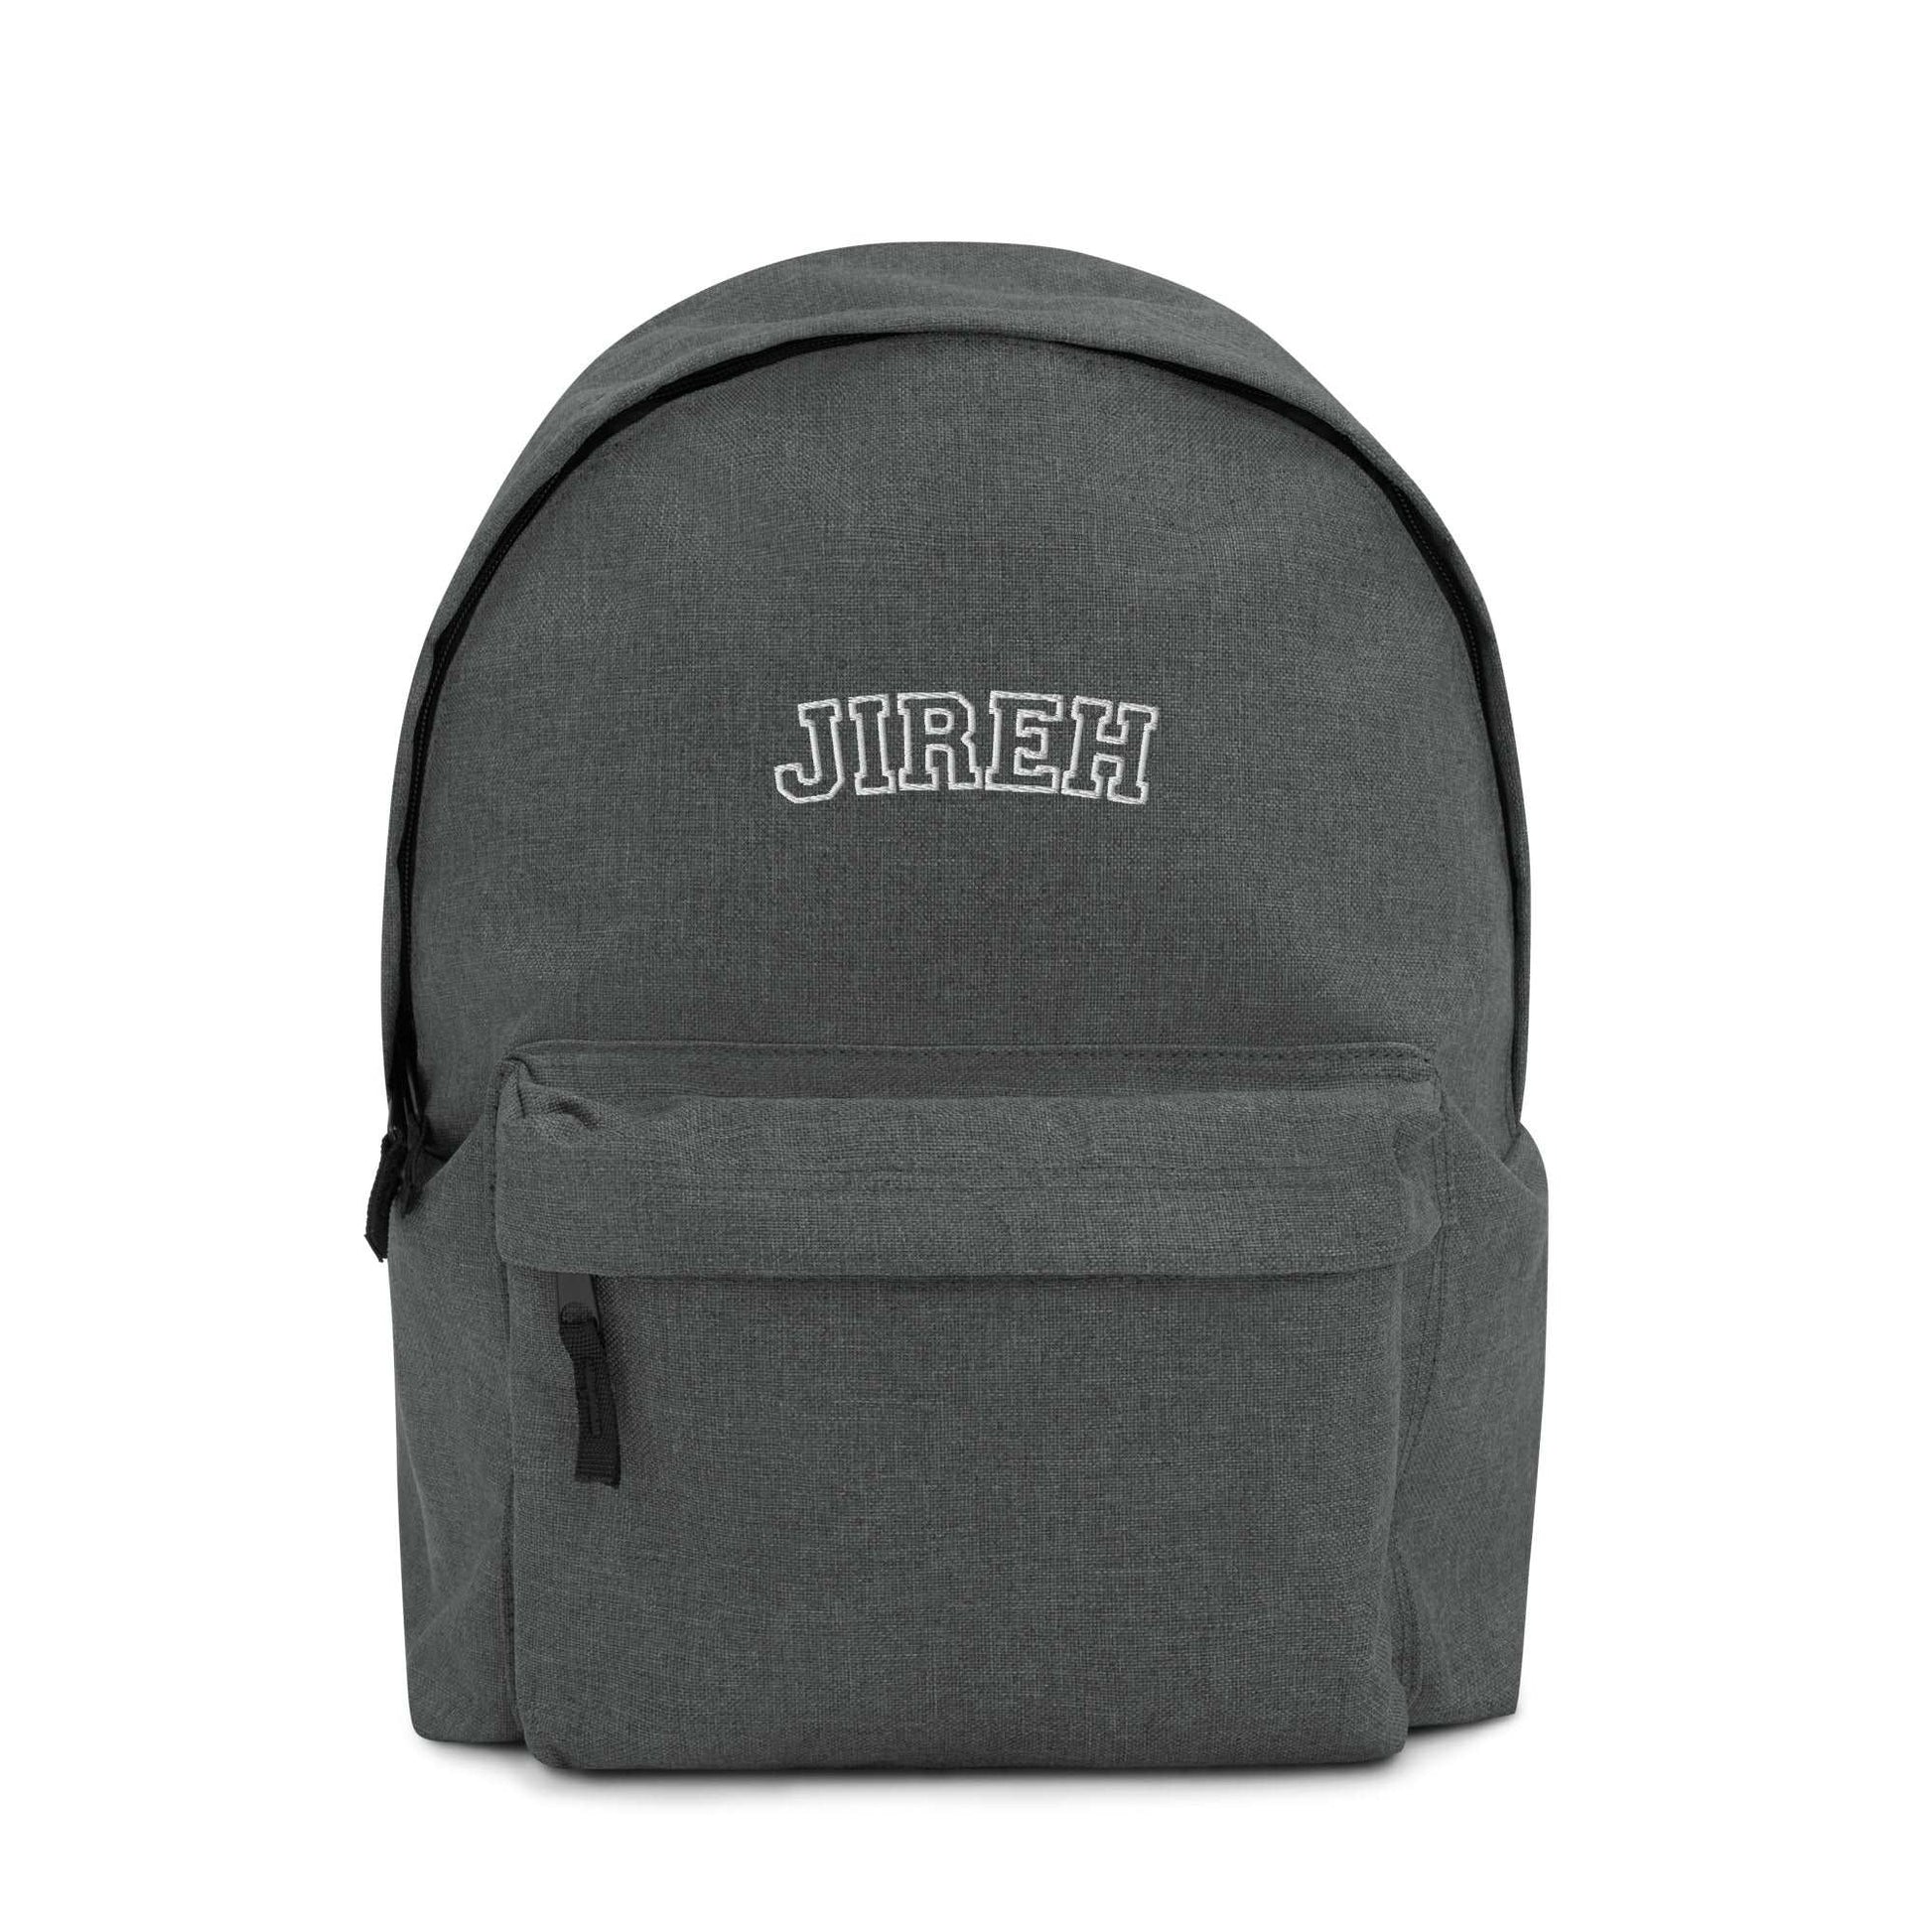 Embroidered Backpack - JIREH